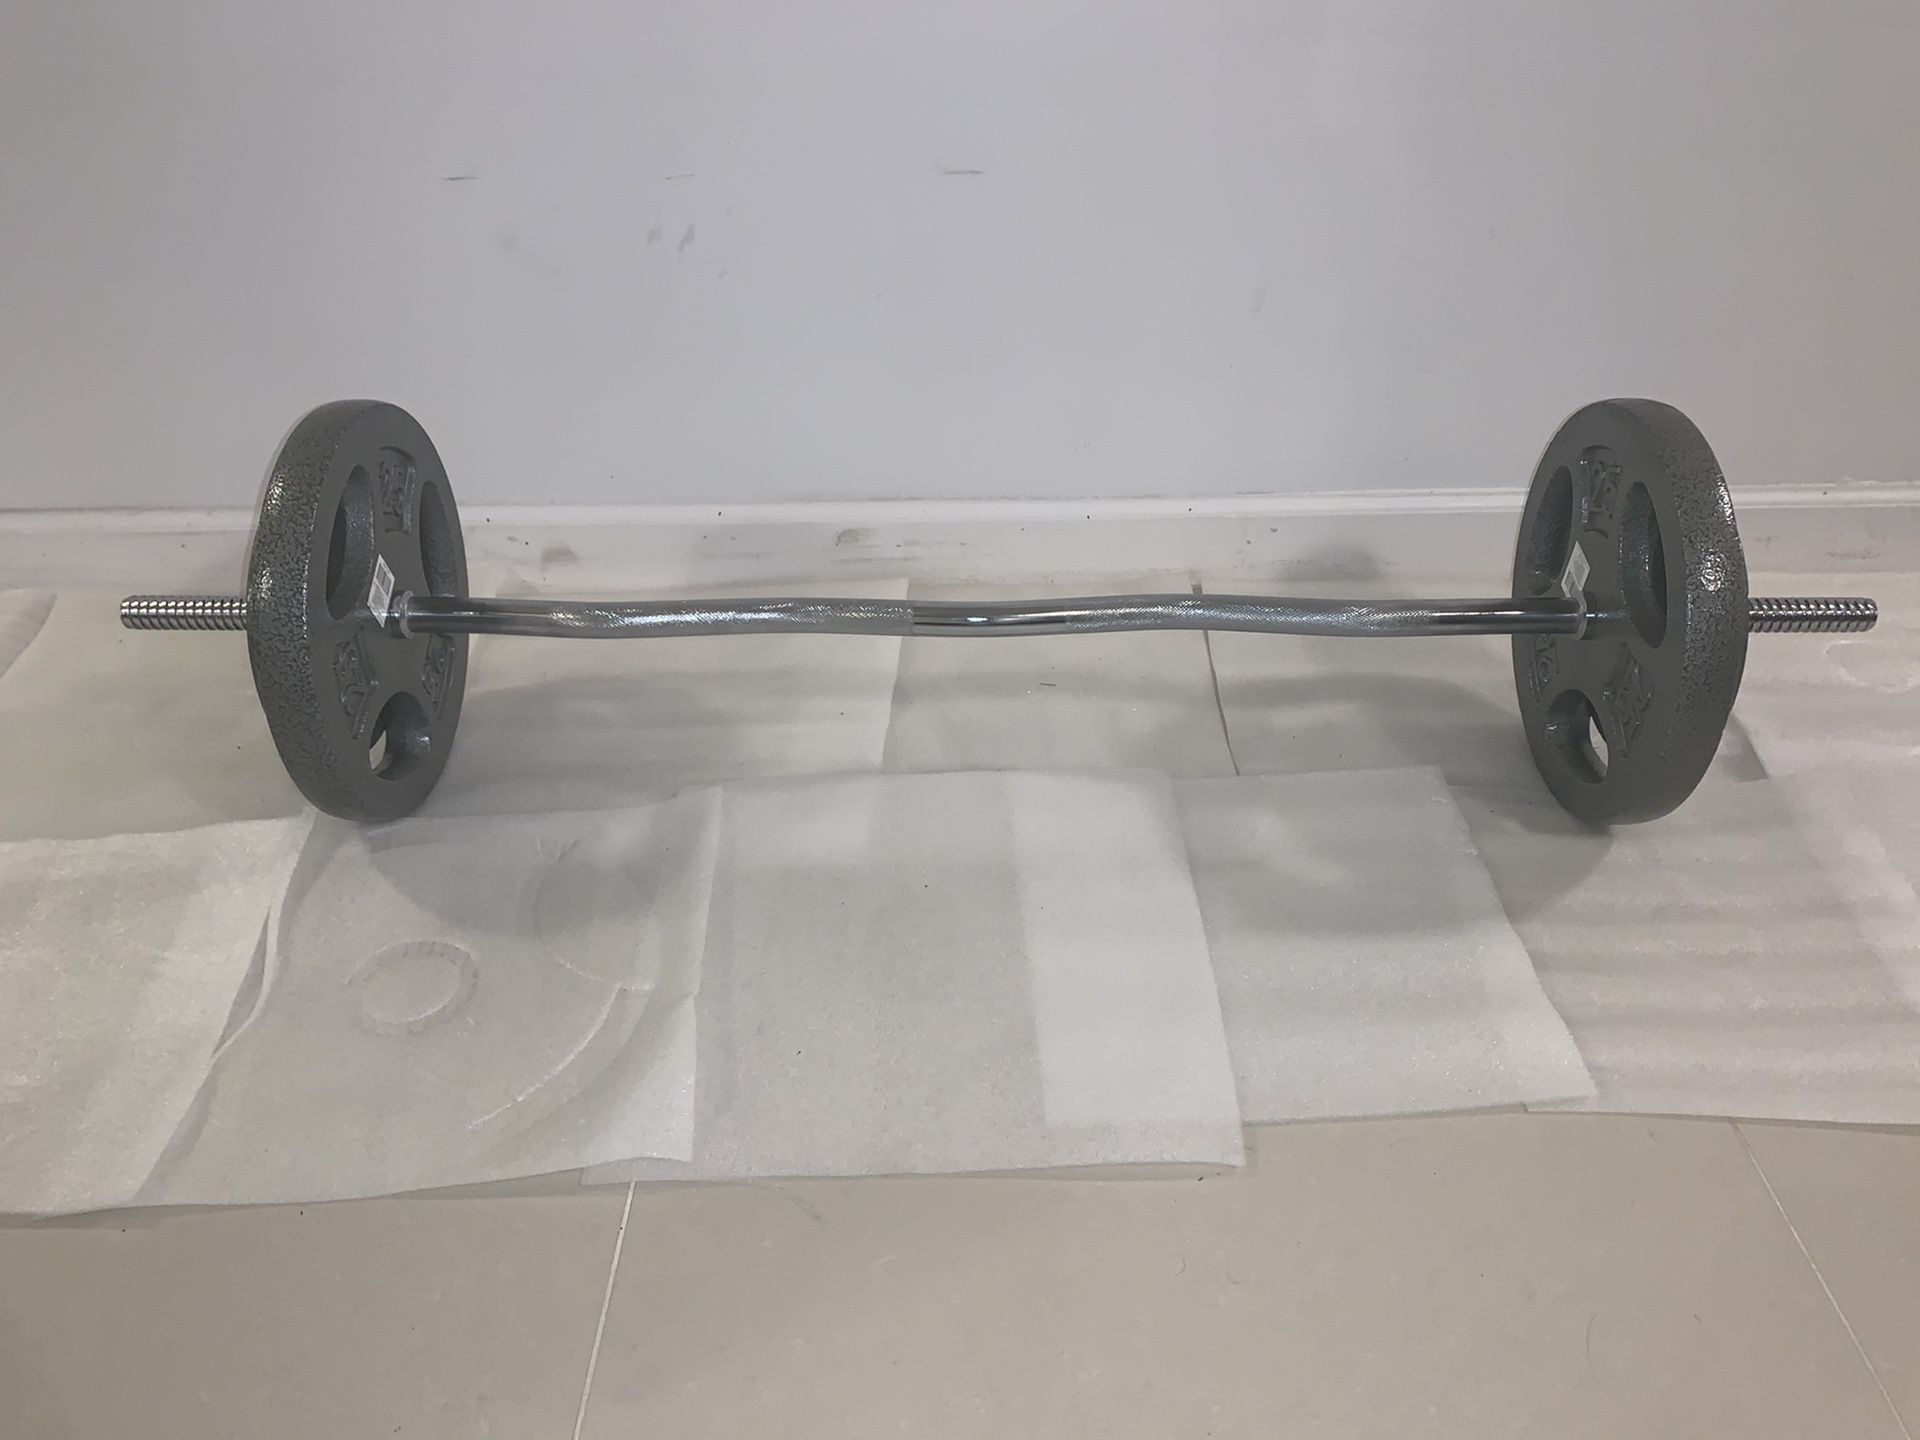 Standard 1’ EZ Curl Bar + 2 Collars + 25 lbs + 10 LBS 1’ Standard Plates. Everything Brand NEW With Tags.